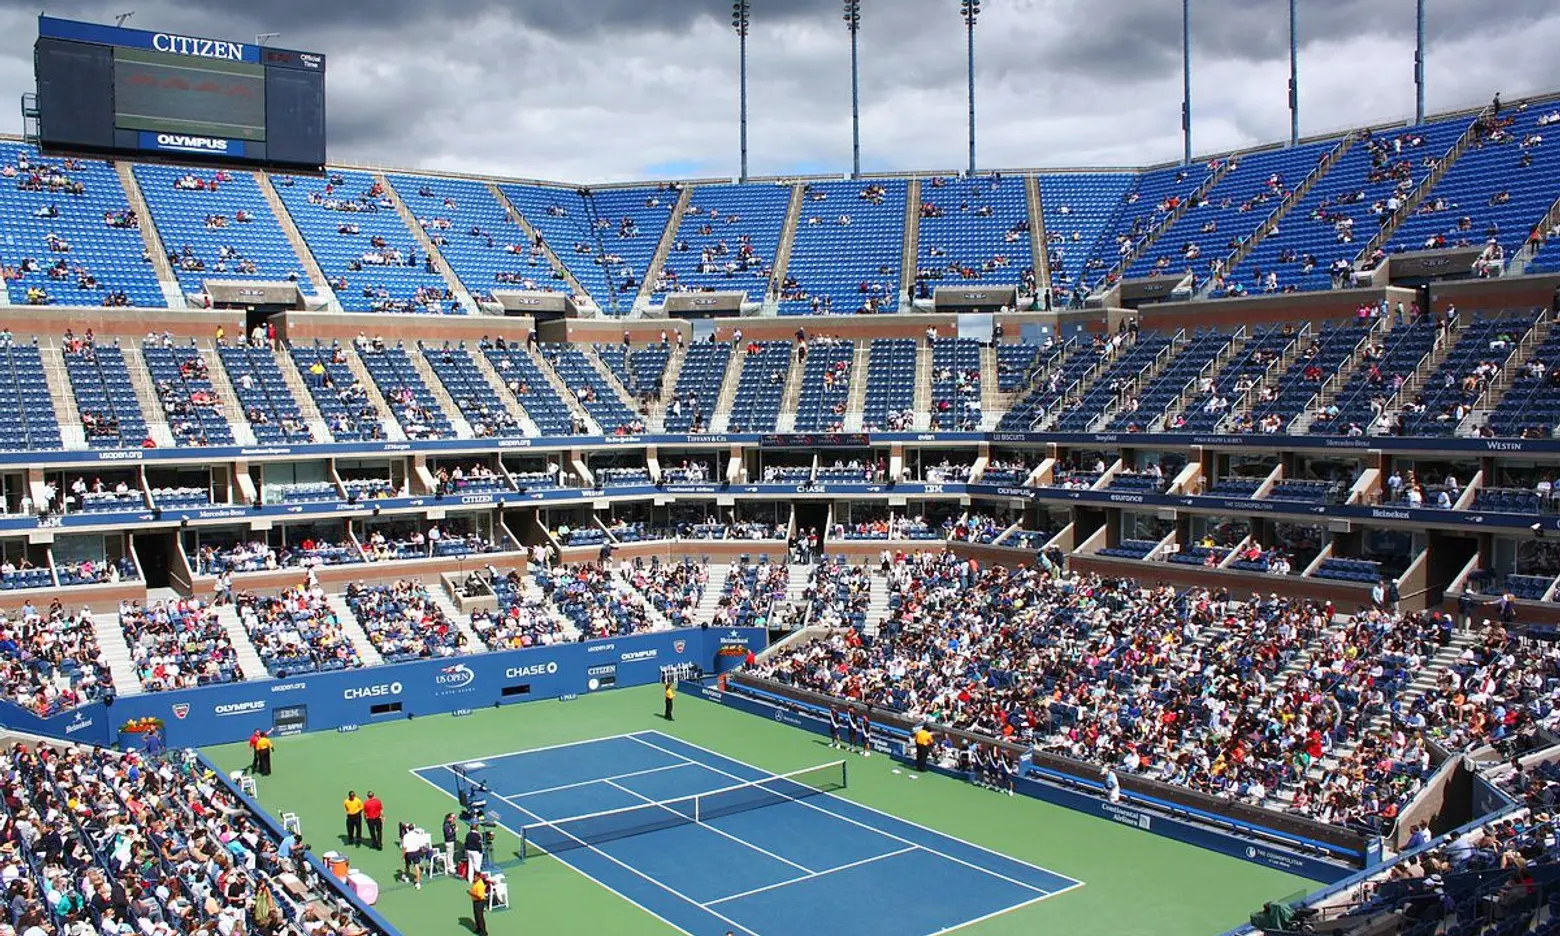 This year’s U.S. Open will happen in Queens without fans